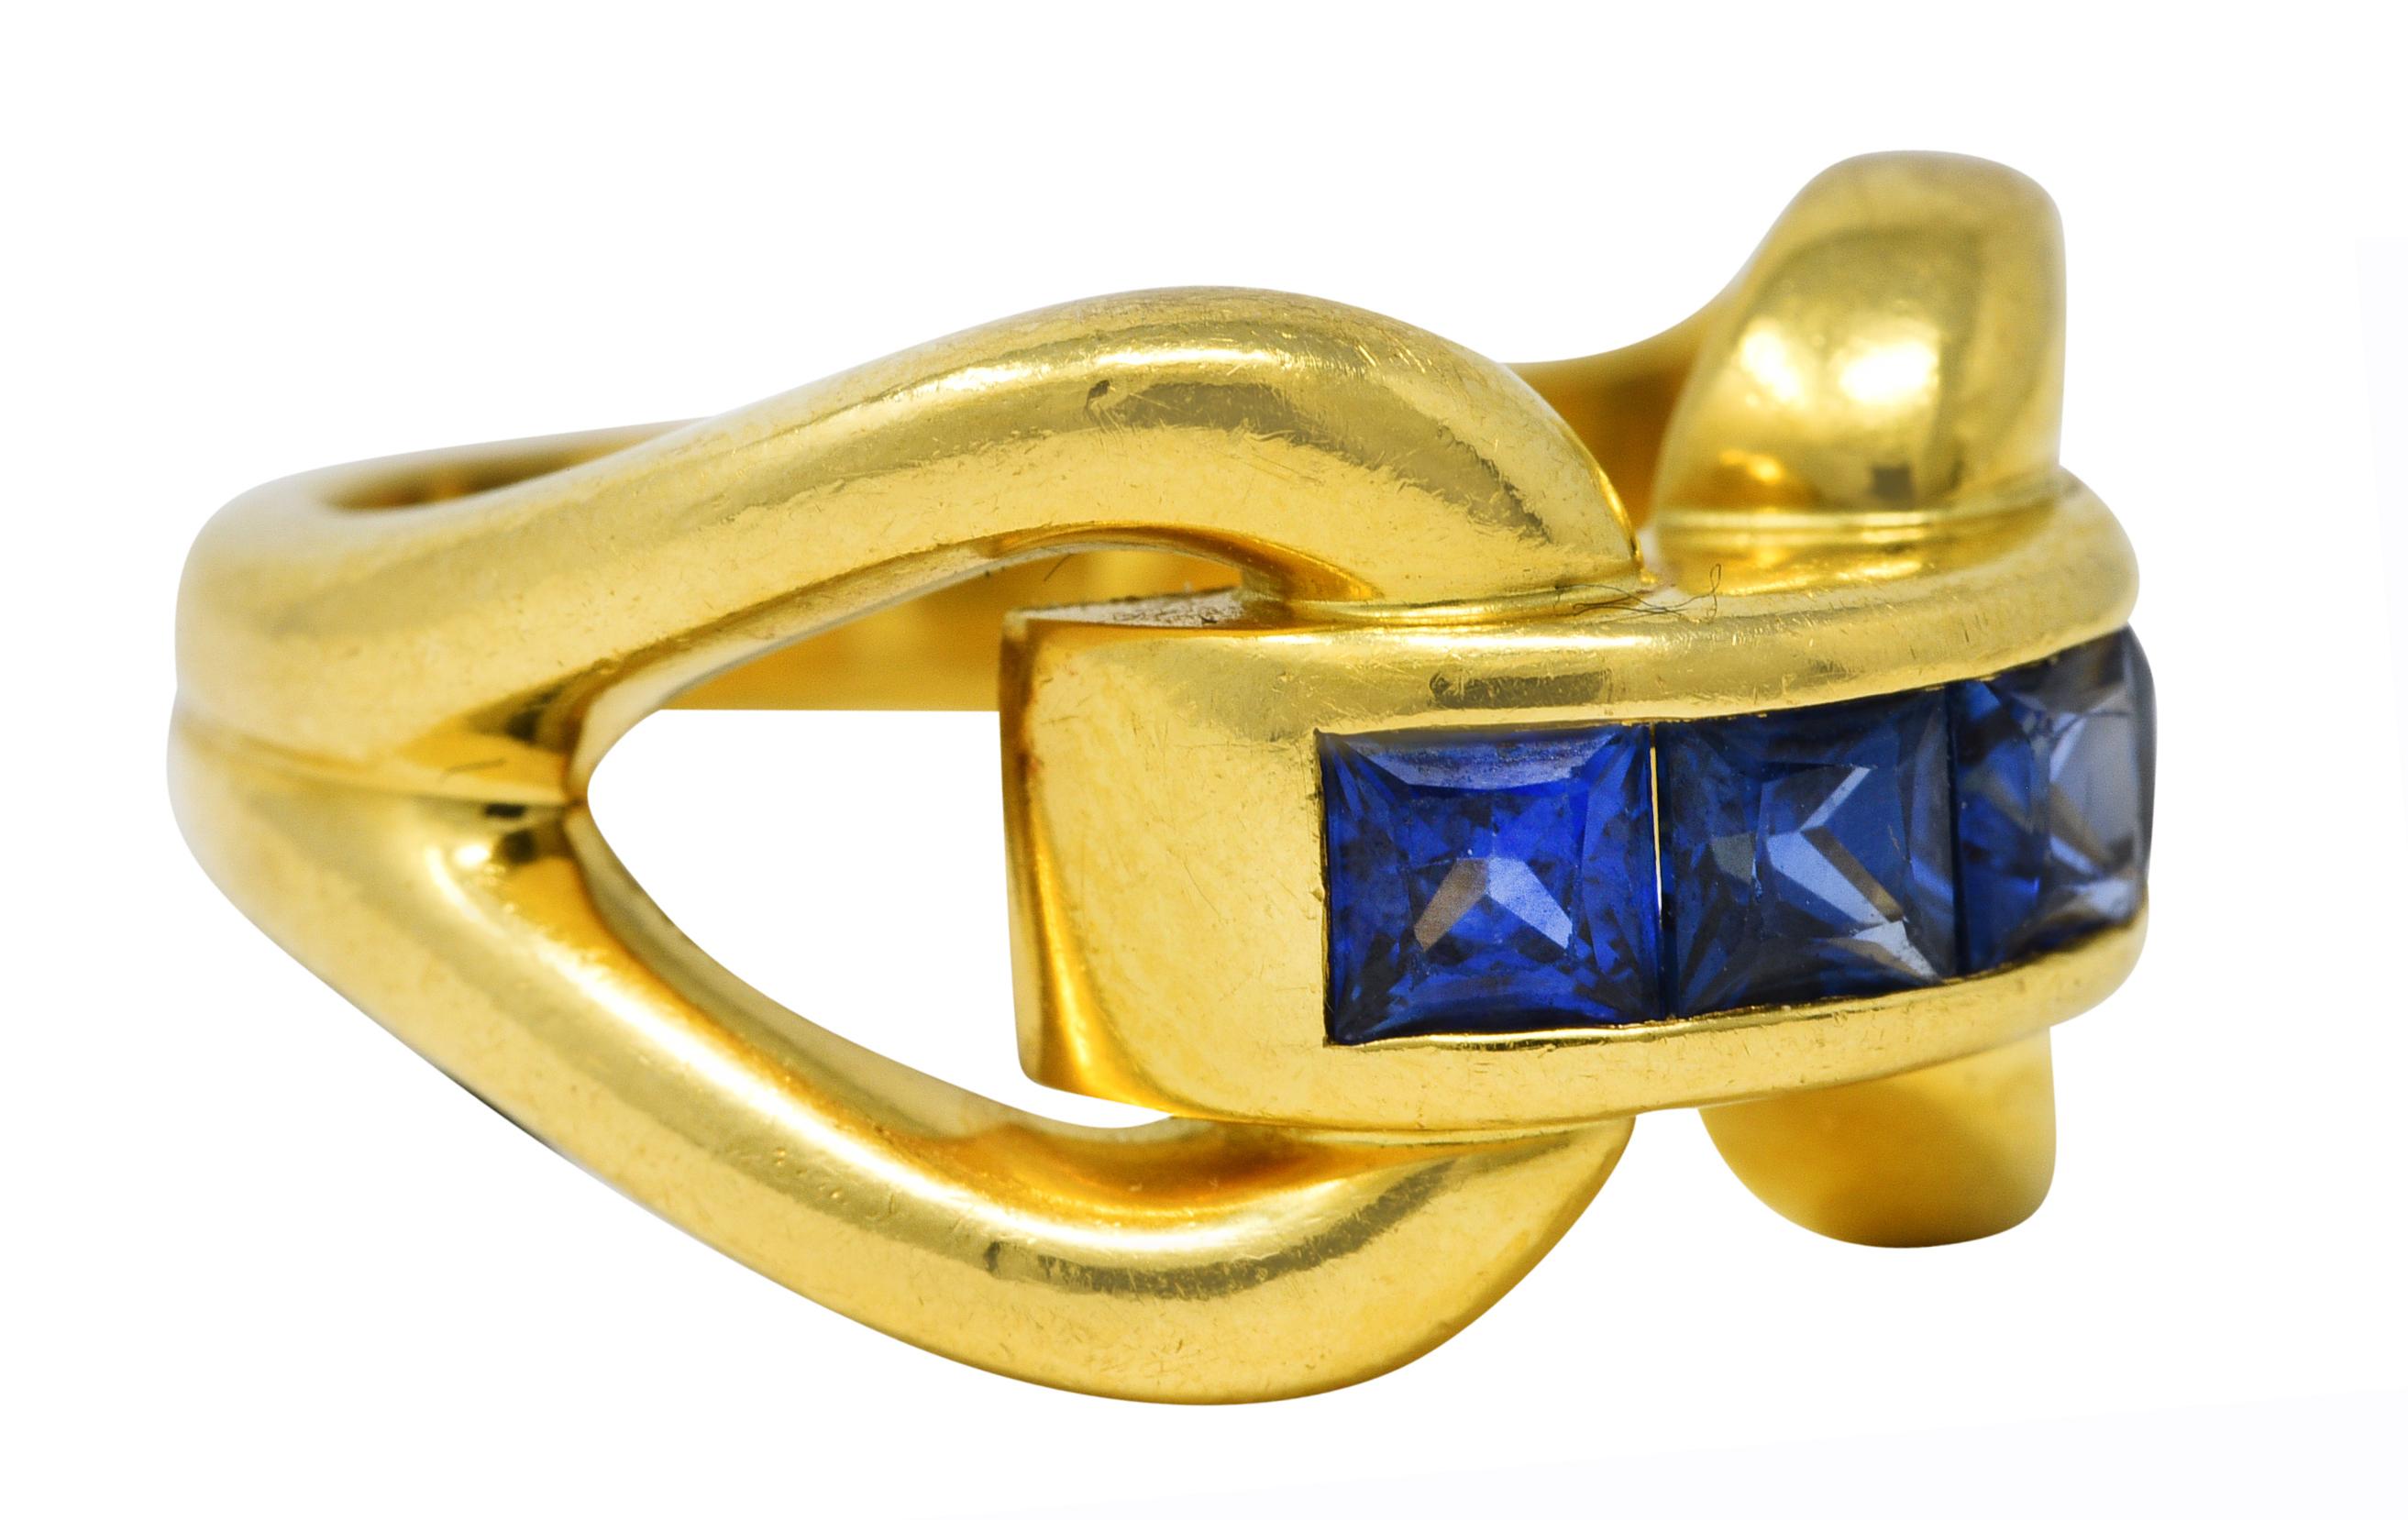 Ring features four square cut sapphires channel set to front - weighing approximately 0.88 carat total. Transparent and deeply saturated blue in color. Flanked by stylized horsebit motif gold shoulders. Completed by grooved shank. Stamped 750 for 18